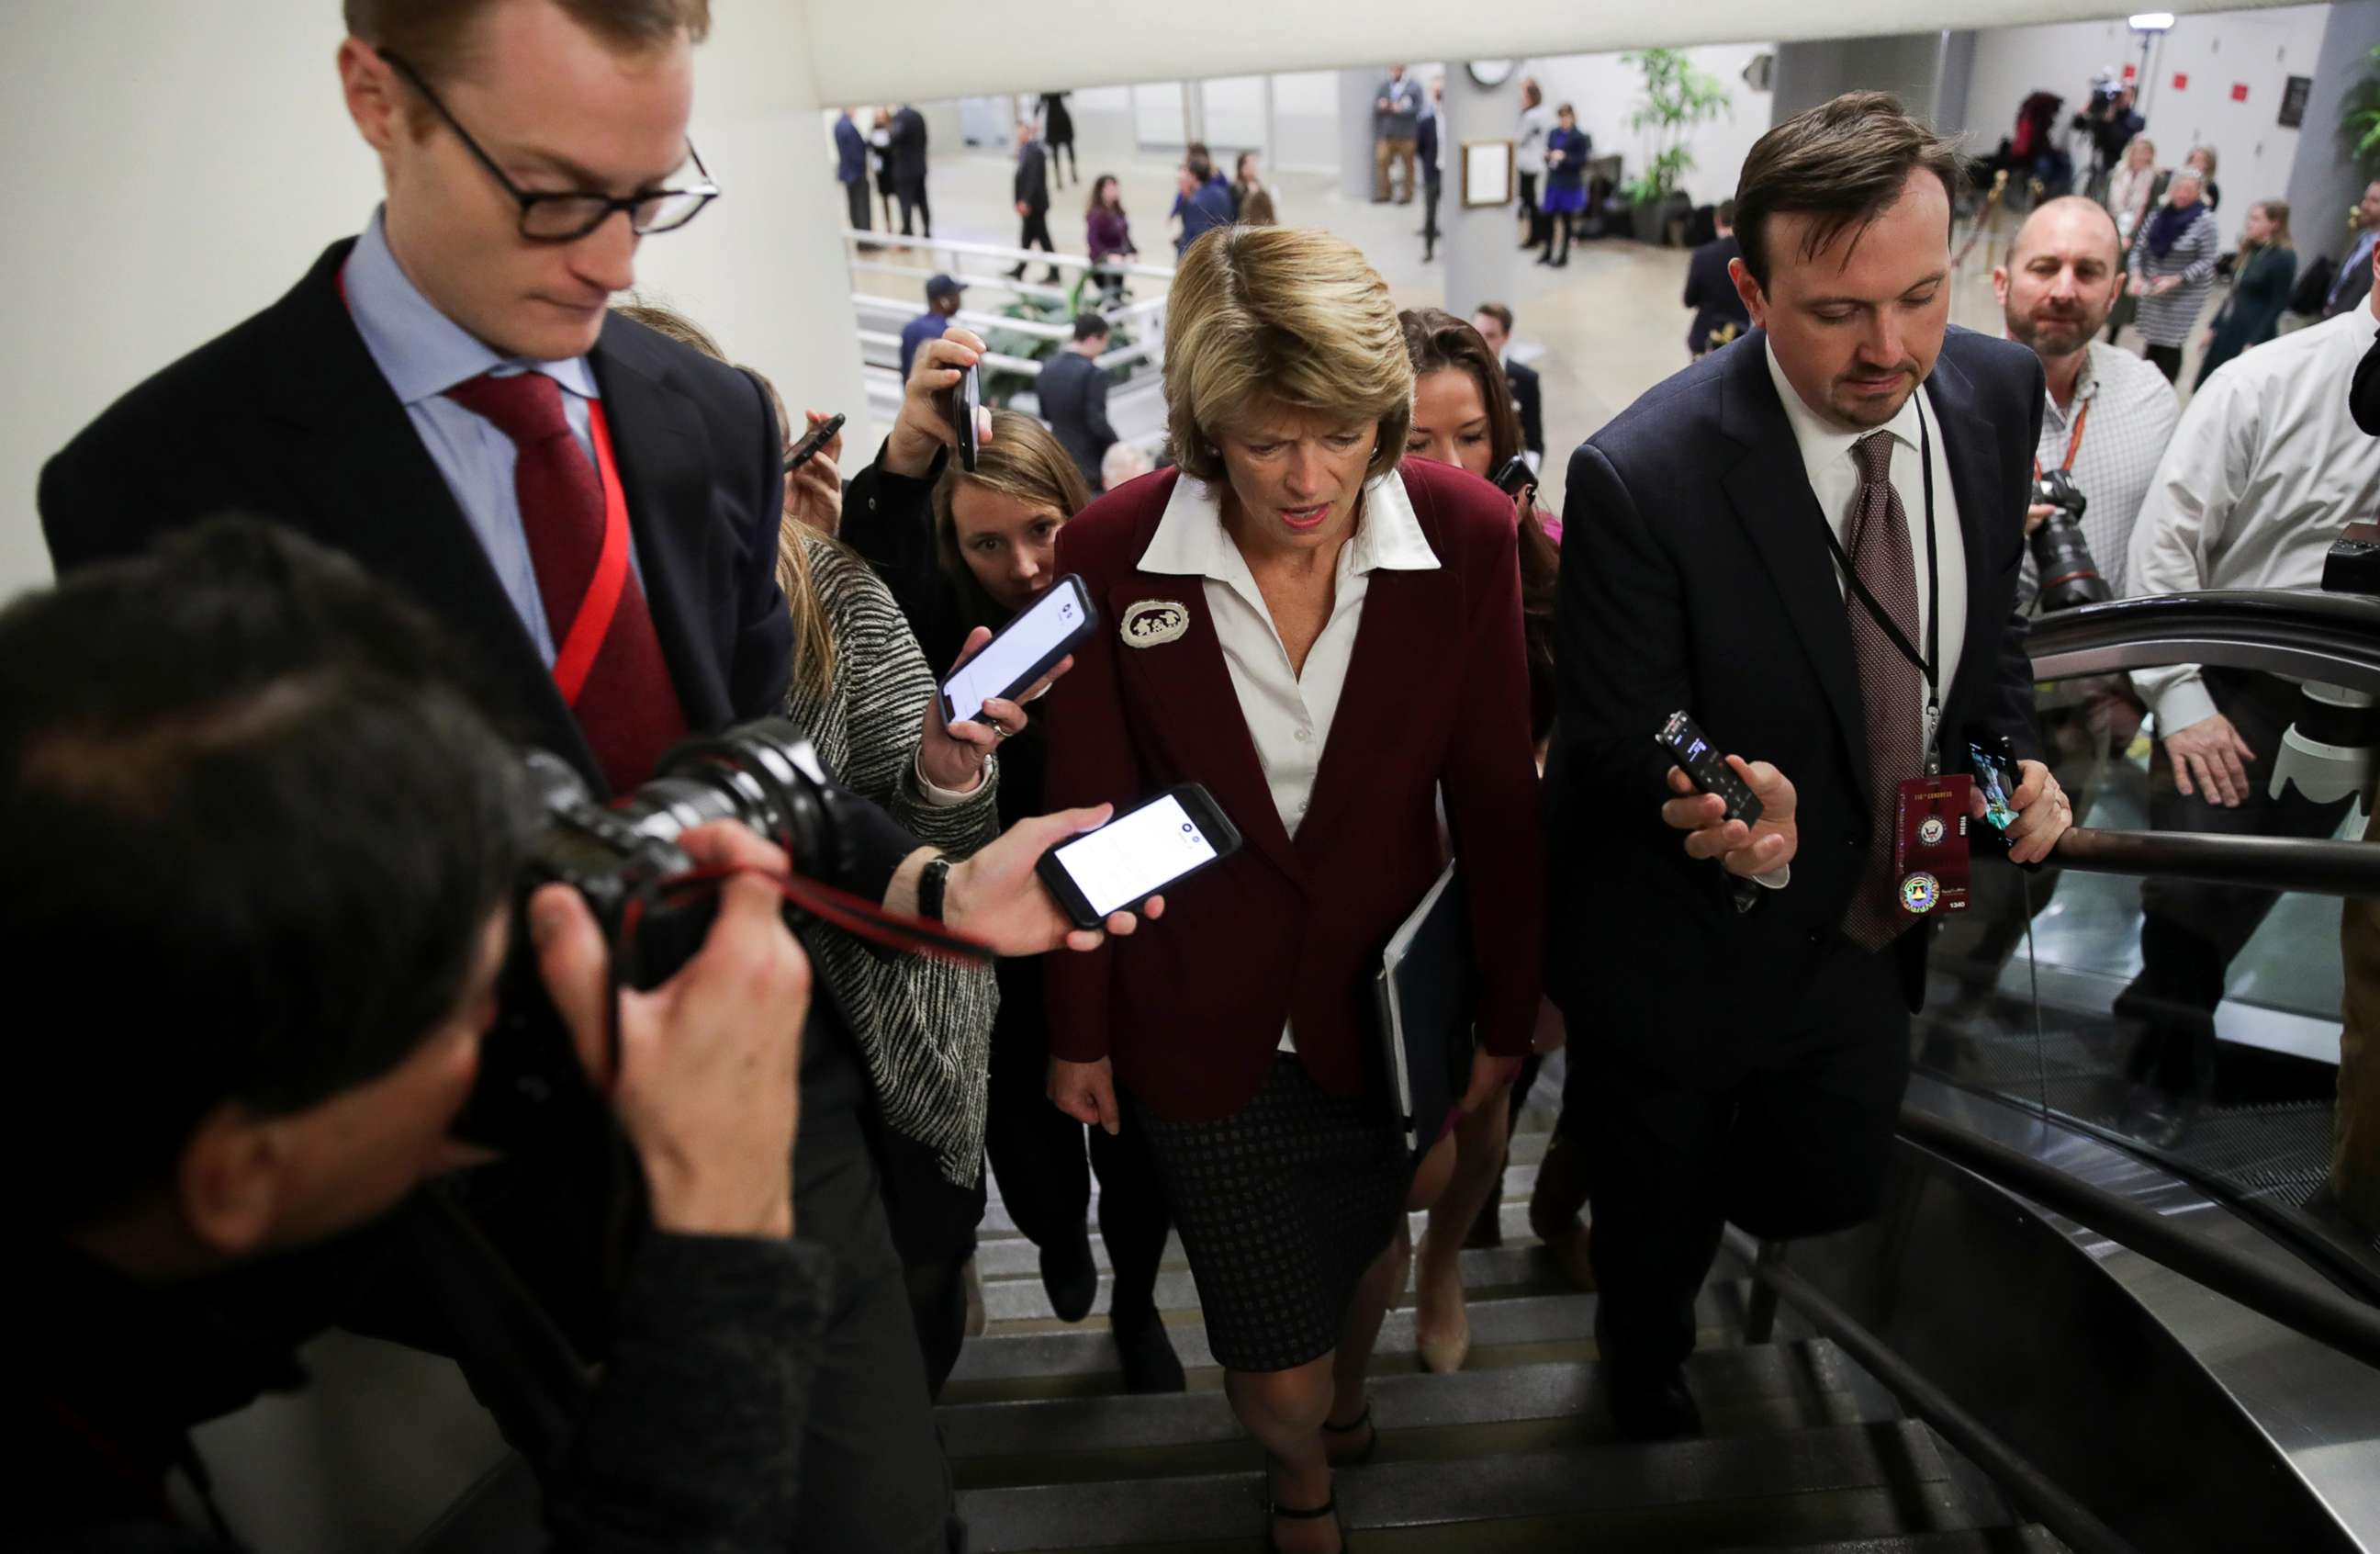 PHOTO: Senator Lisa Murkowski is surrounded by reporters as she arrives for the Senate impeachment trial of President Donald Trump at the Capitol in Washington, Jan. 28, 2020.